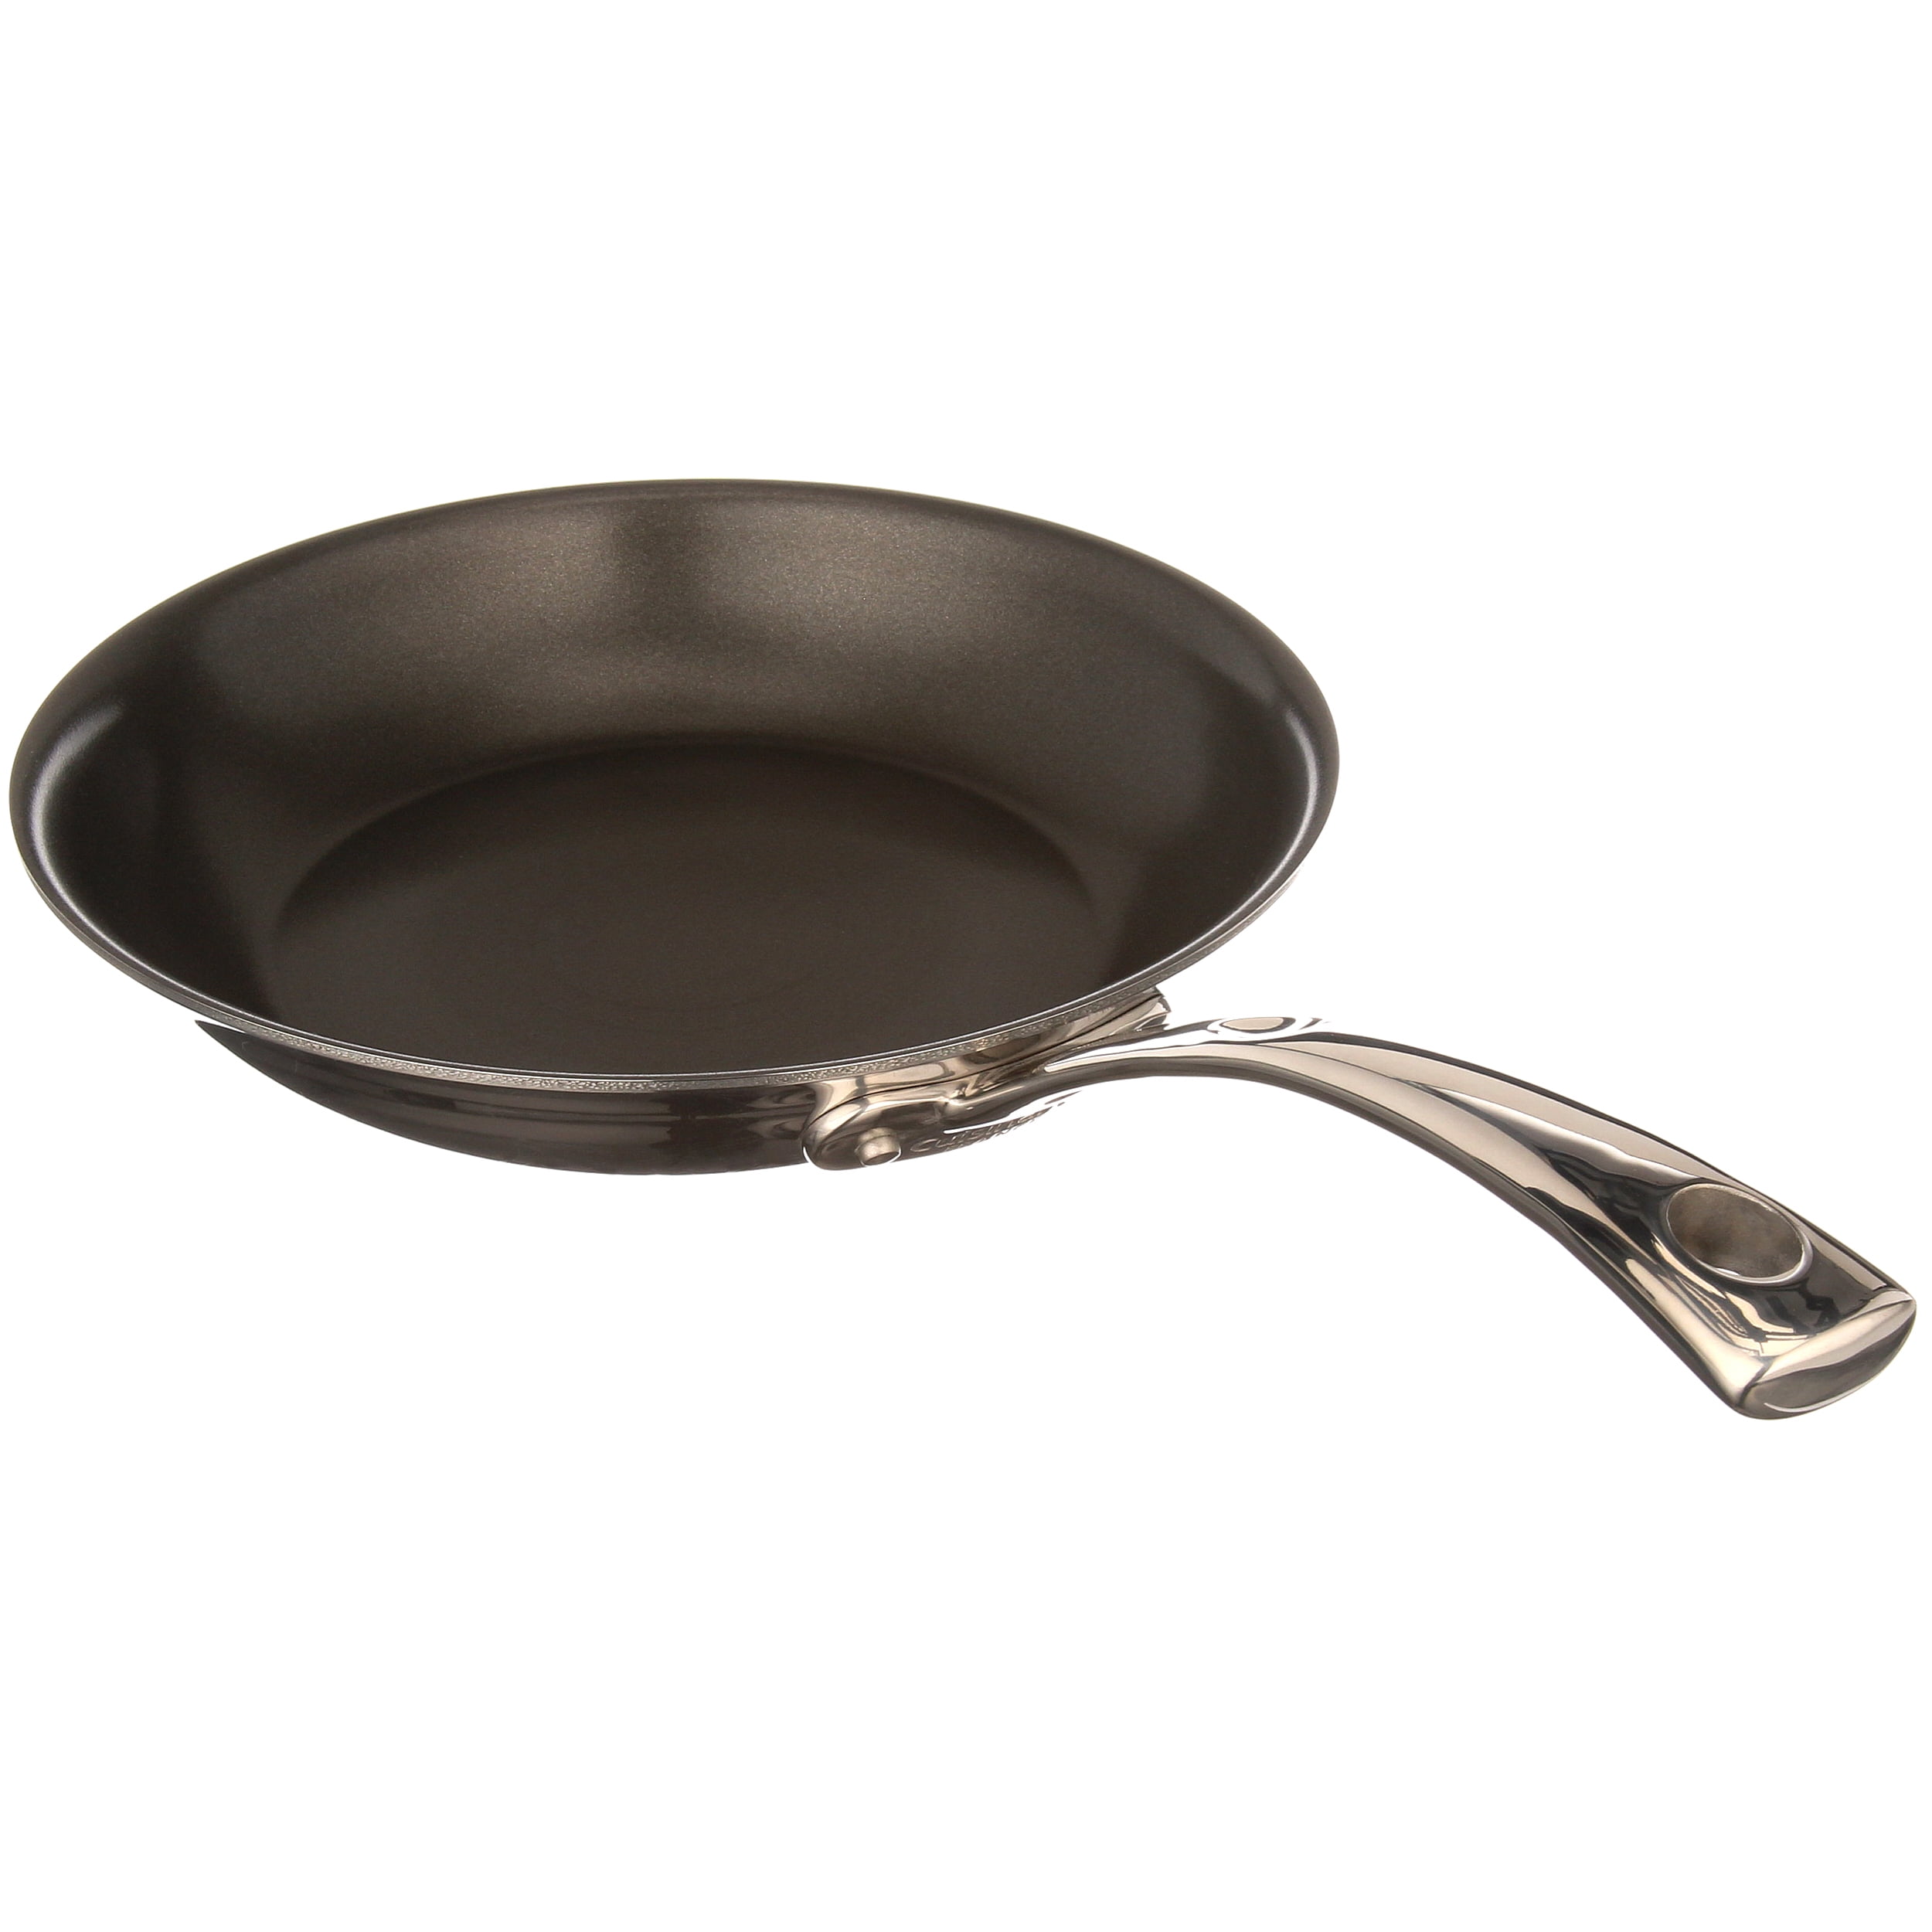 Cuisinart French Classic Tri-Ply Stainless 10-Inch Fry Pan — Luxio